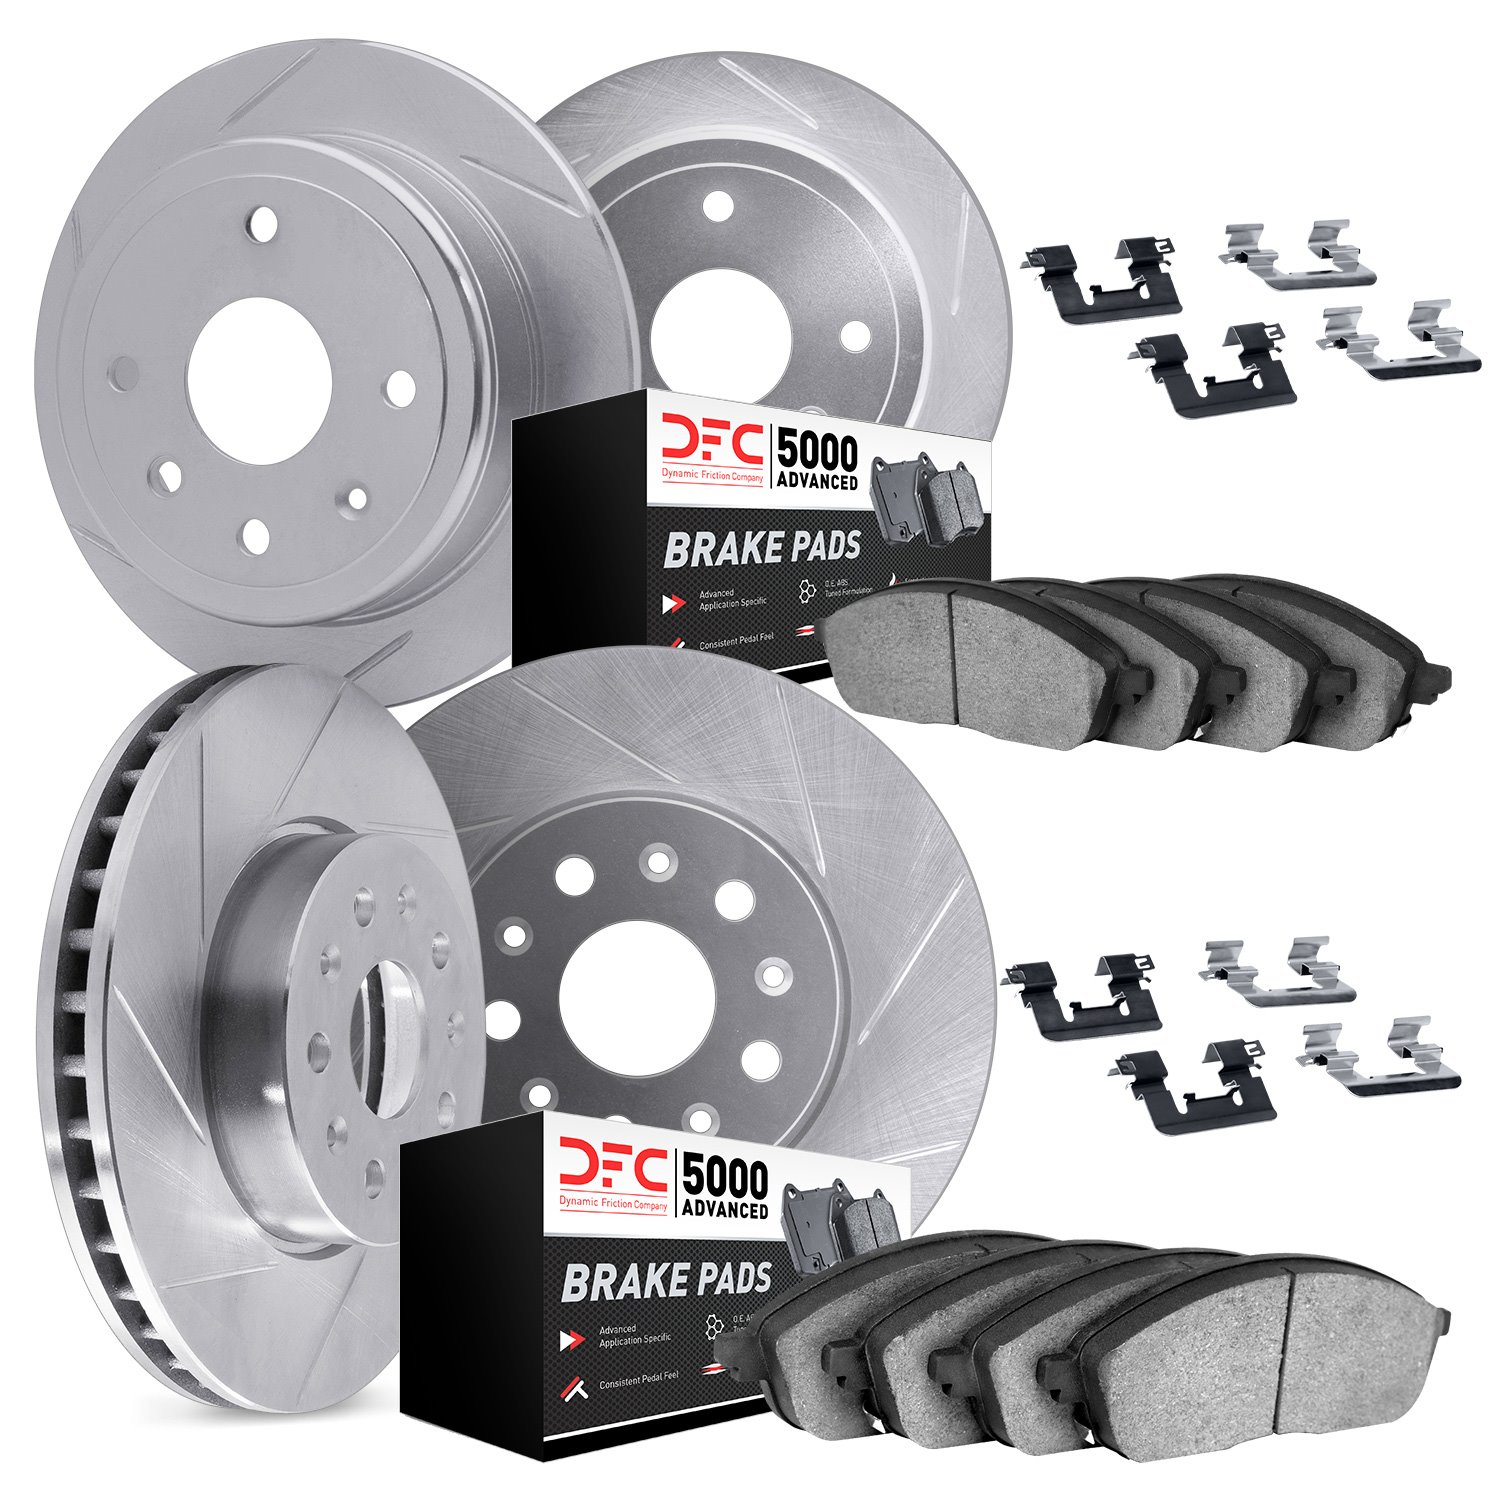 5514-40031 Slotted Brake Rotors w/5000 Advanced Brake Pads Kit & Hardware [Silver], Fits Select Mopar, Position: Front and Rear